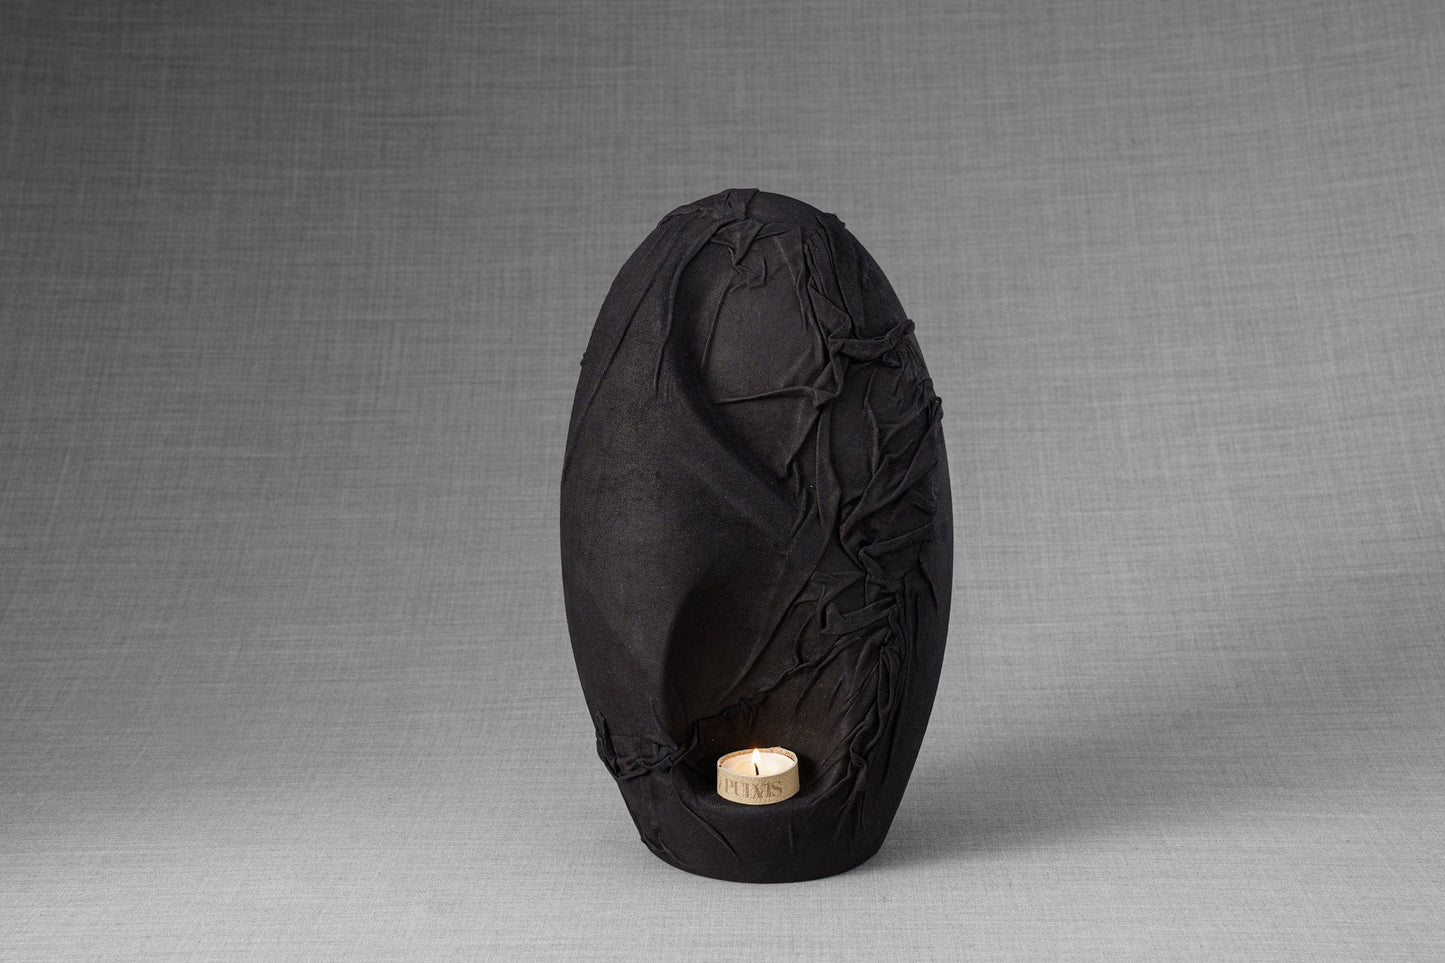 Pulvis Art Urns Exclusive Urn Leather Cremation Urn for Ashes "Eternity" - Exclusive Edition